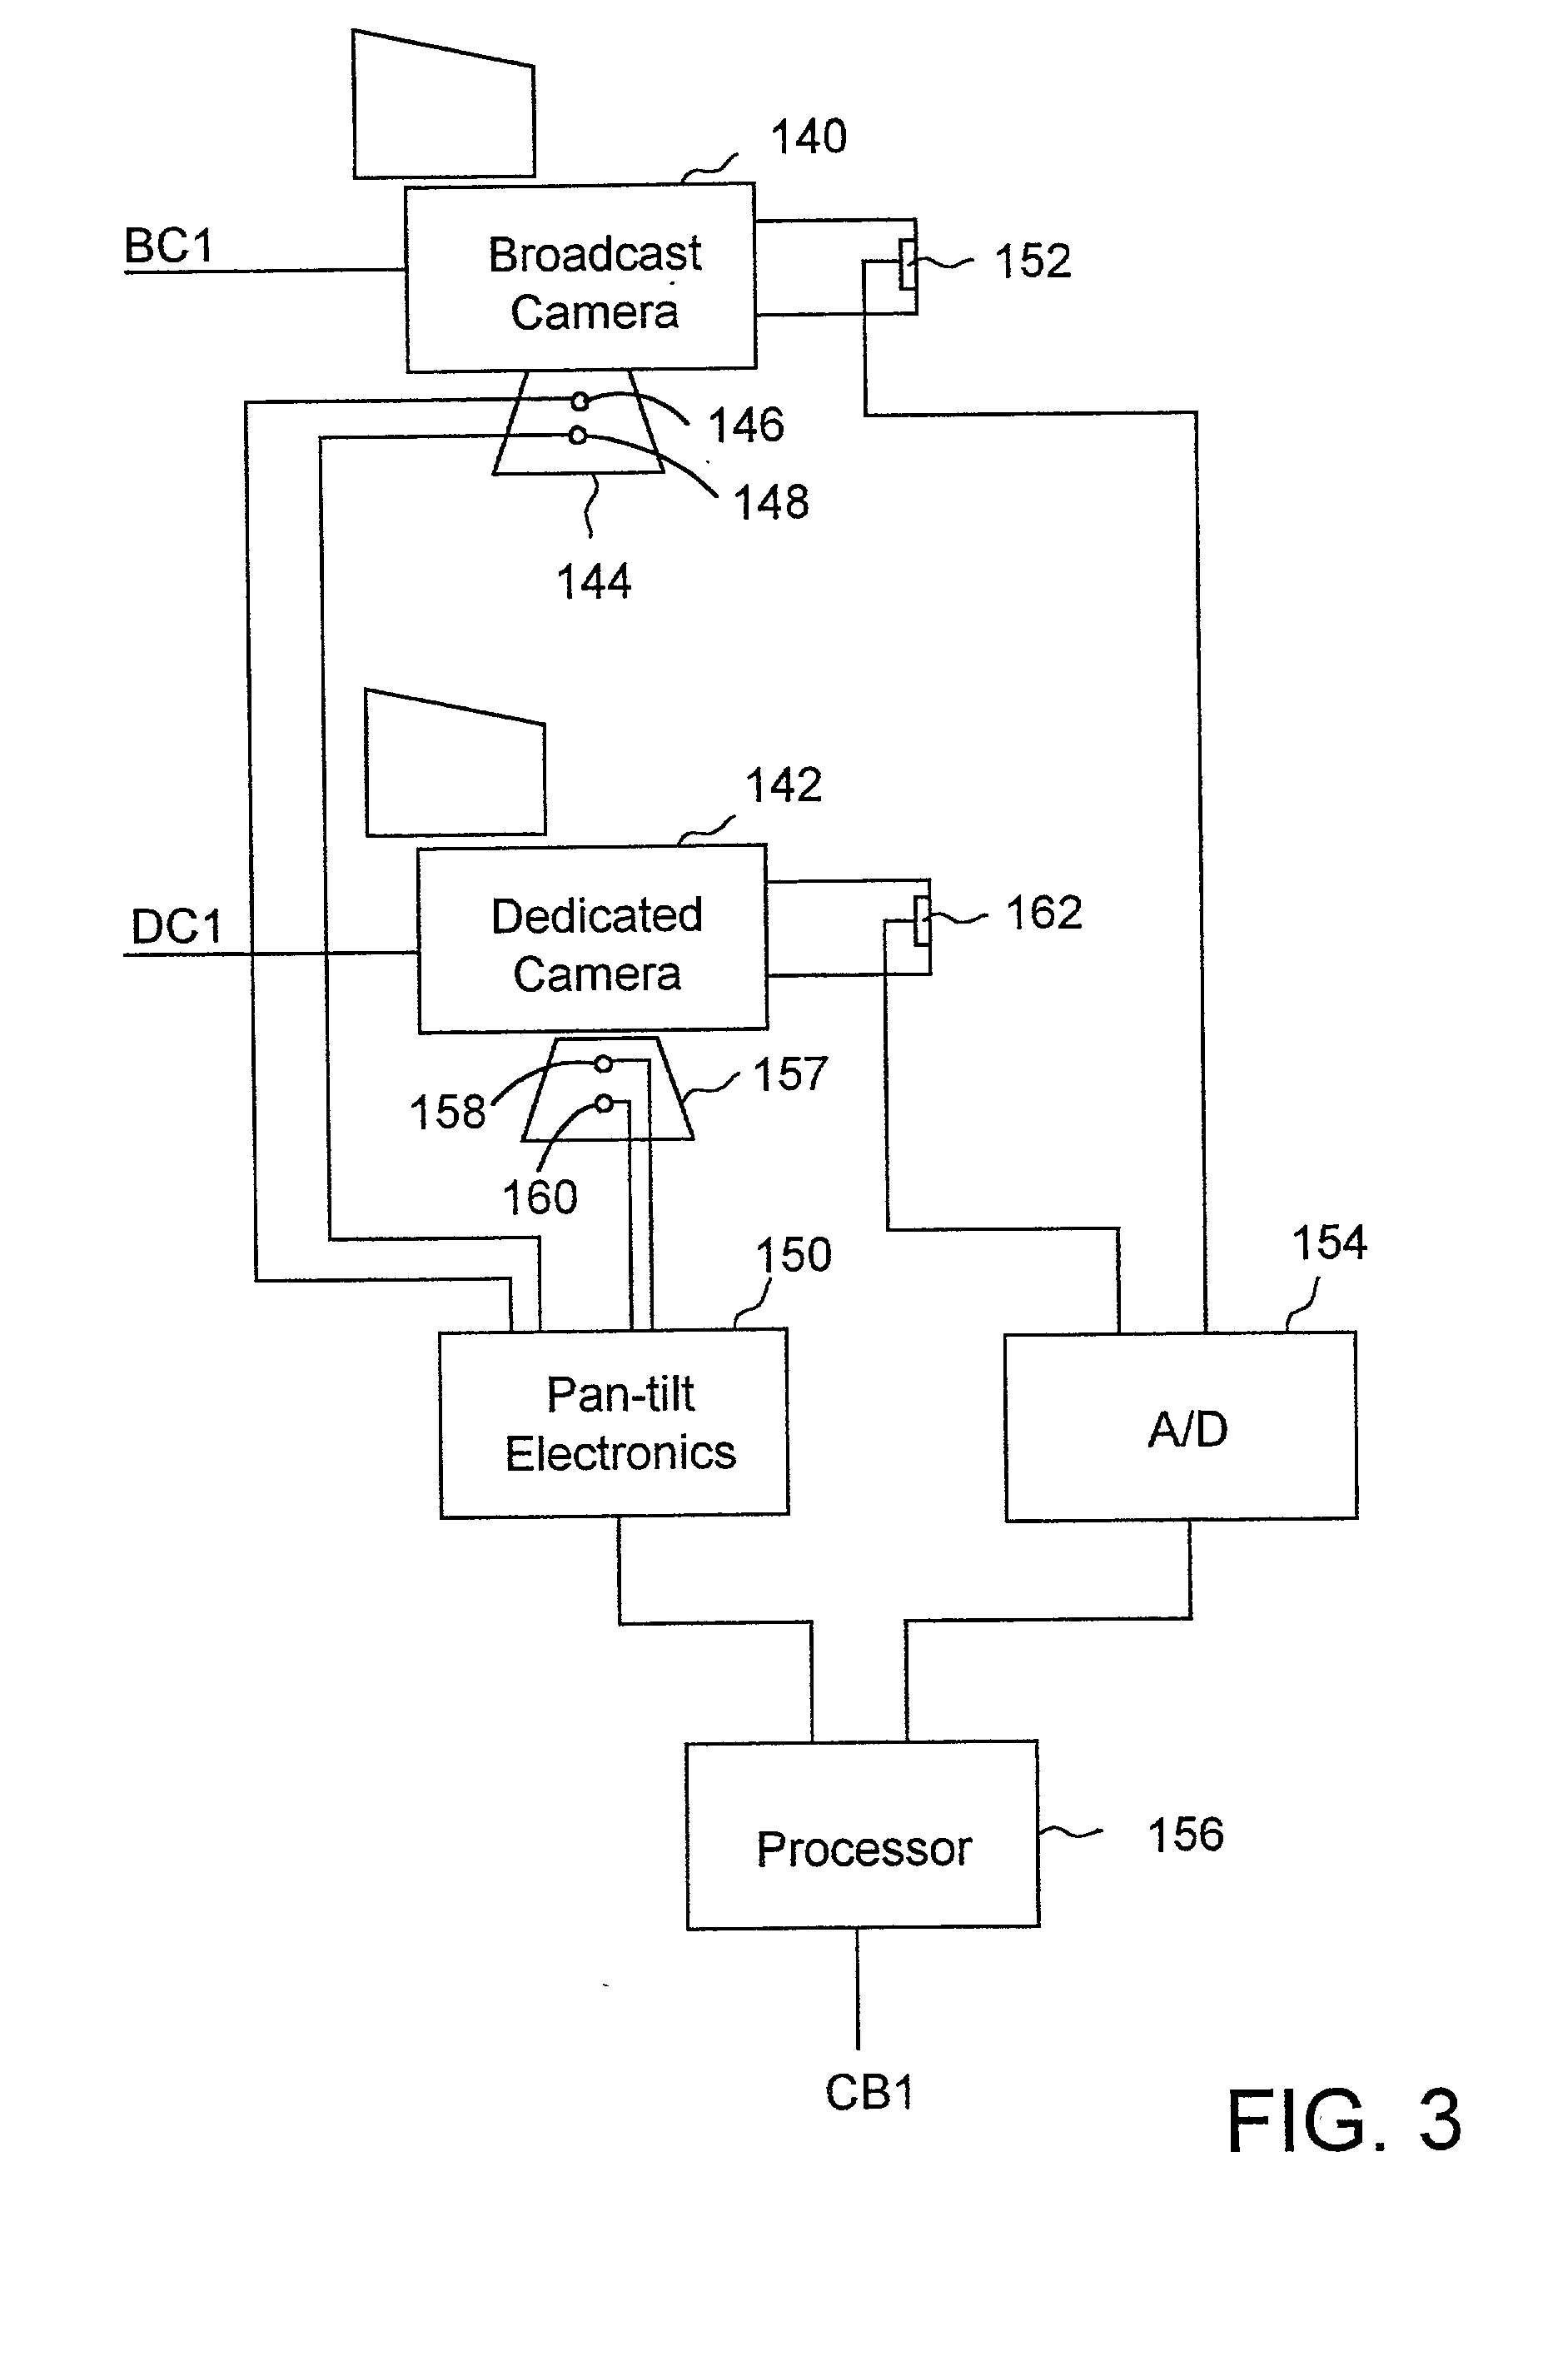 Method and apparatus for enhancing the broadcast of a live event